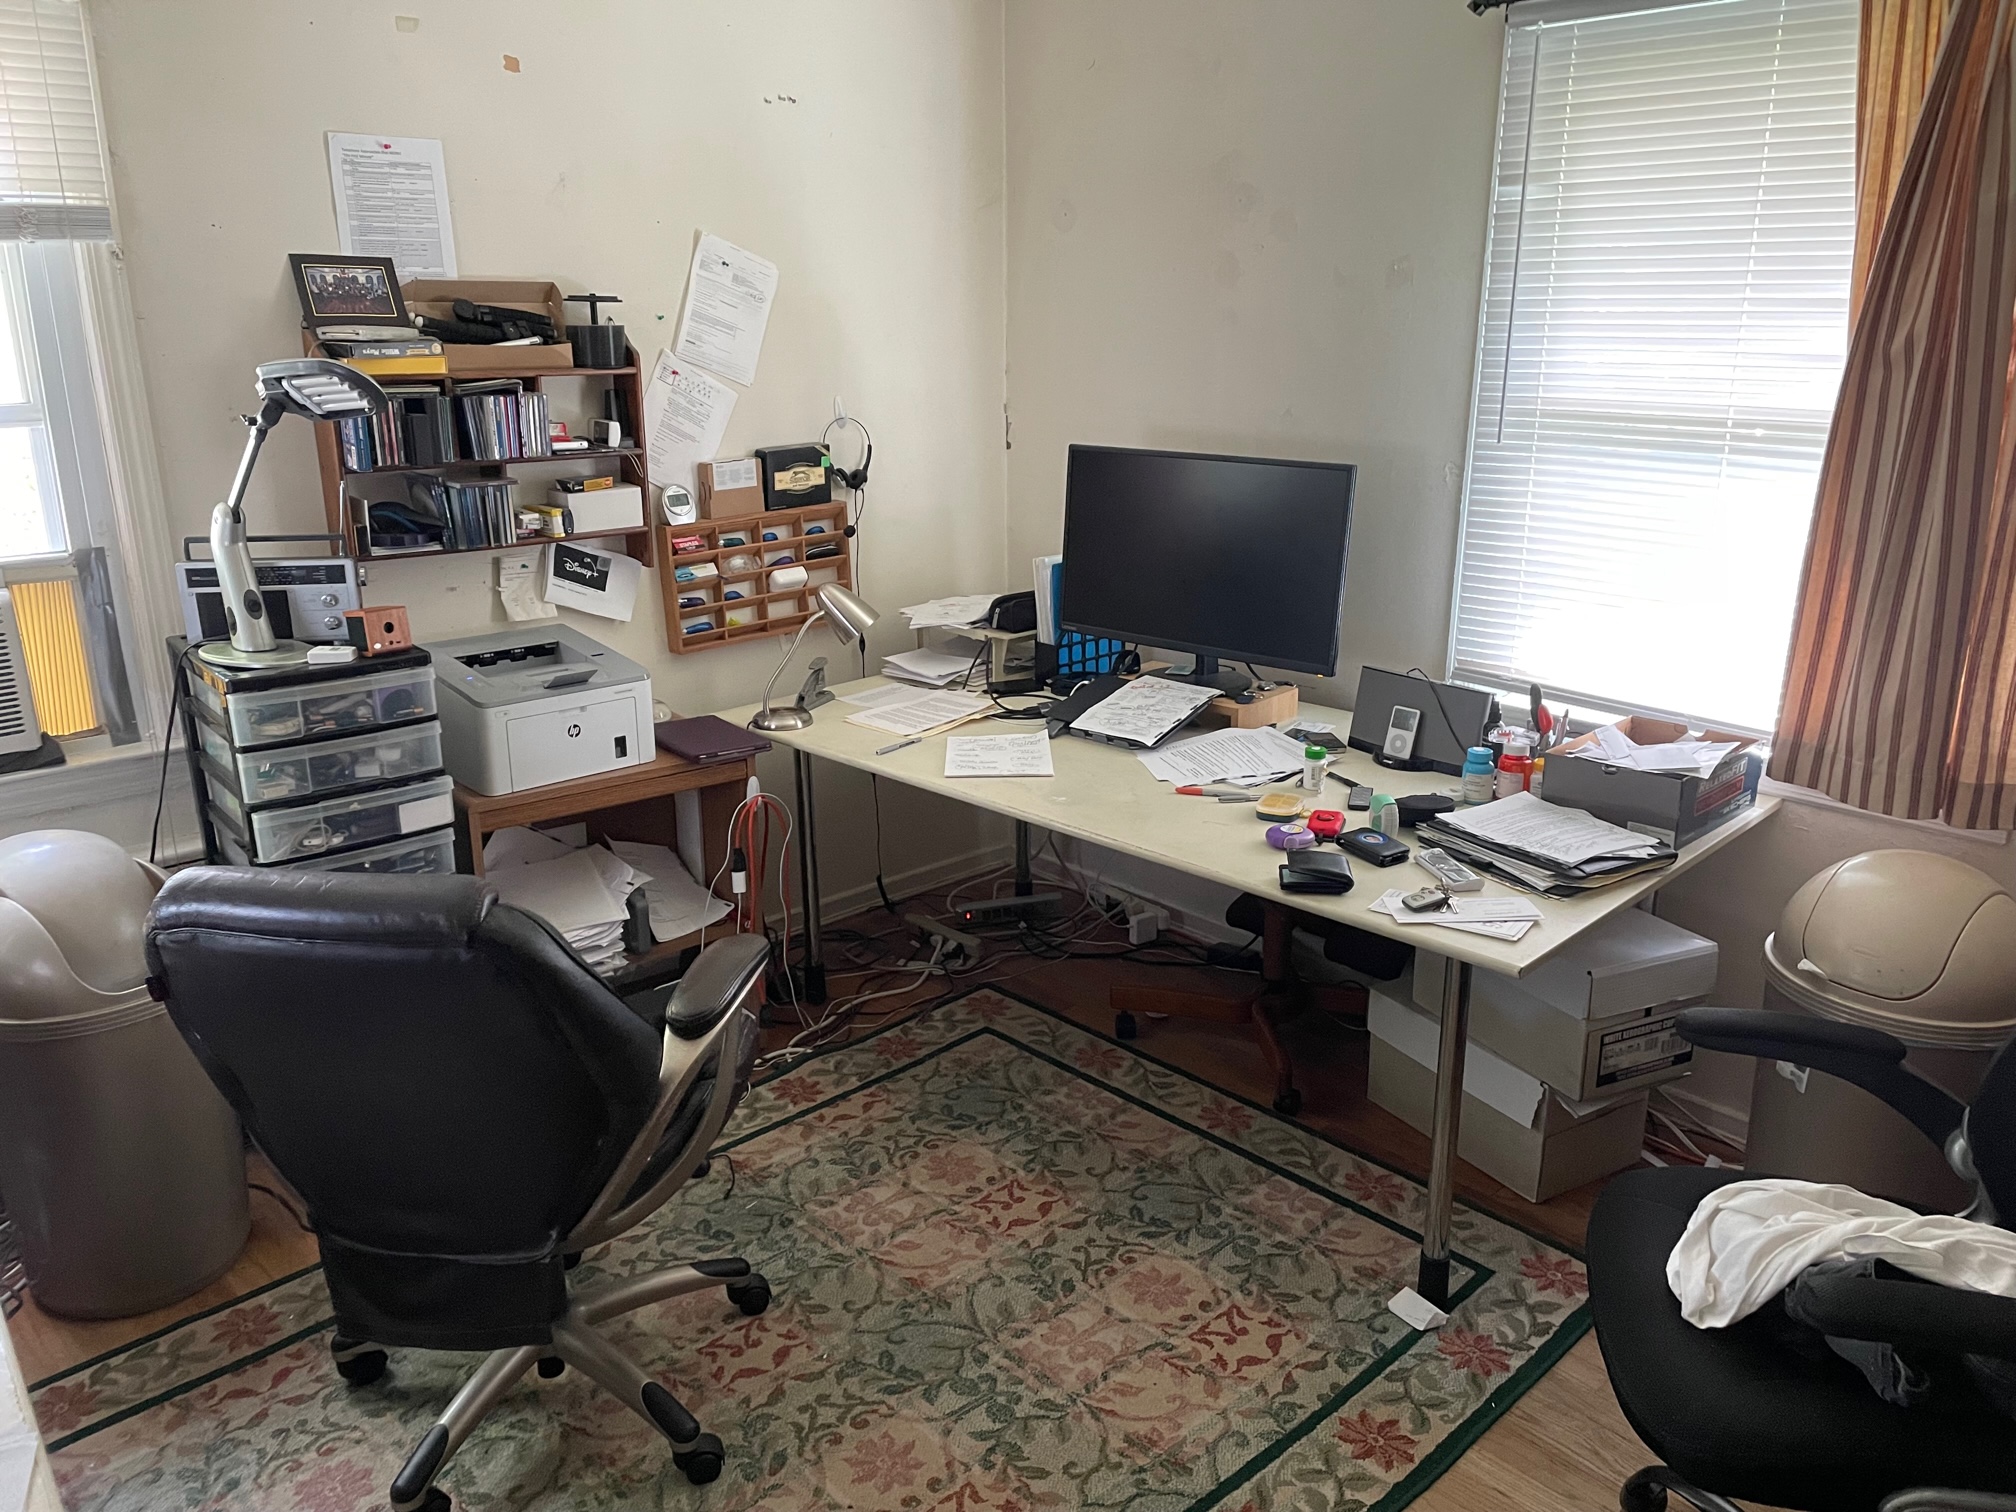 people with messy offices are usually more creative and productive. Or so I hear.